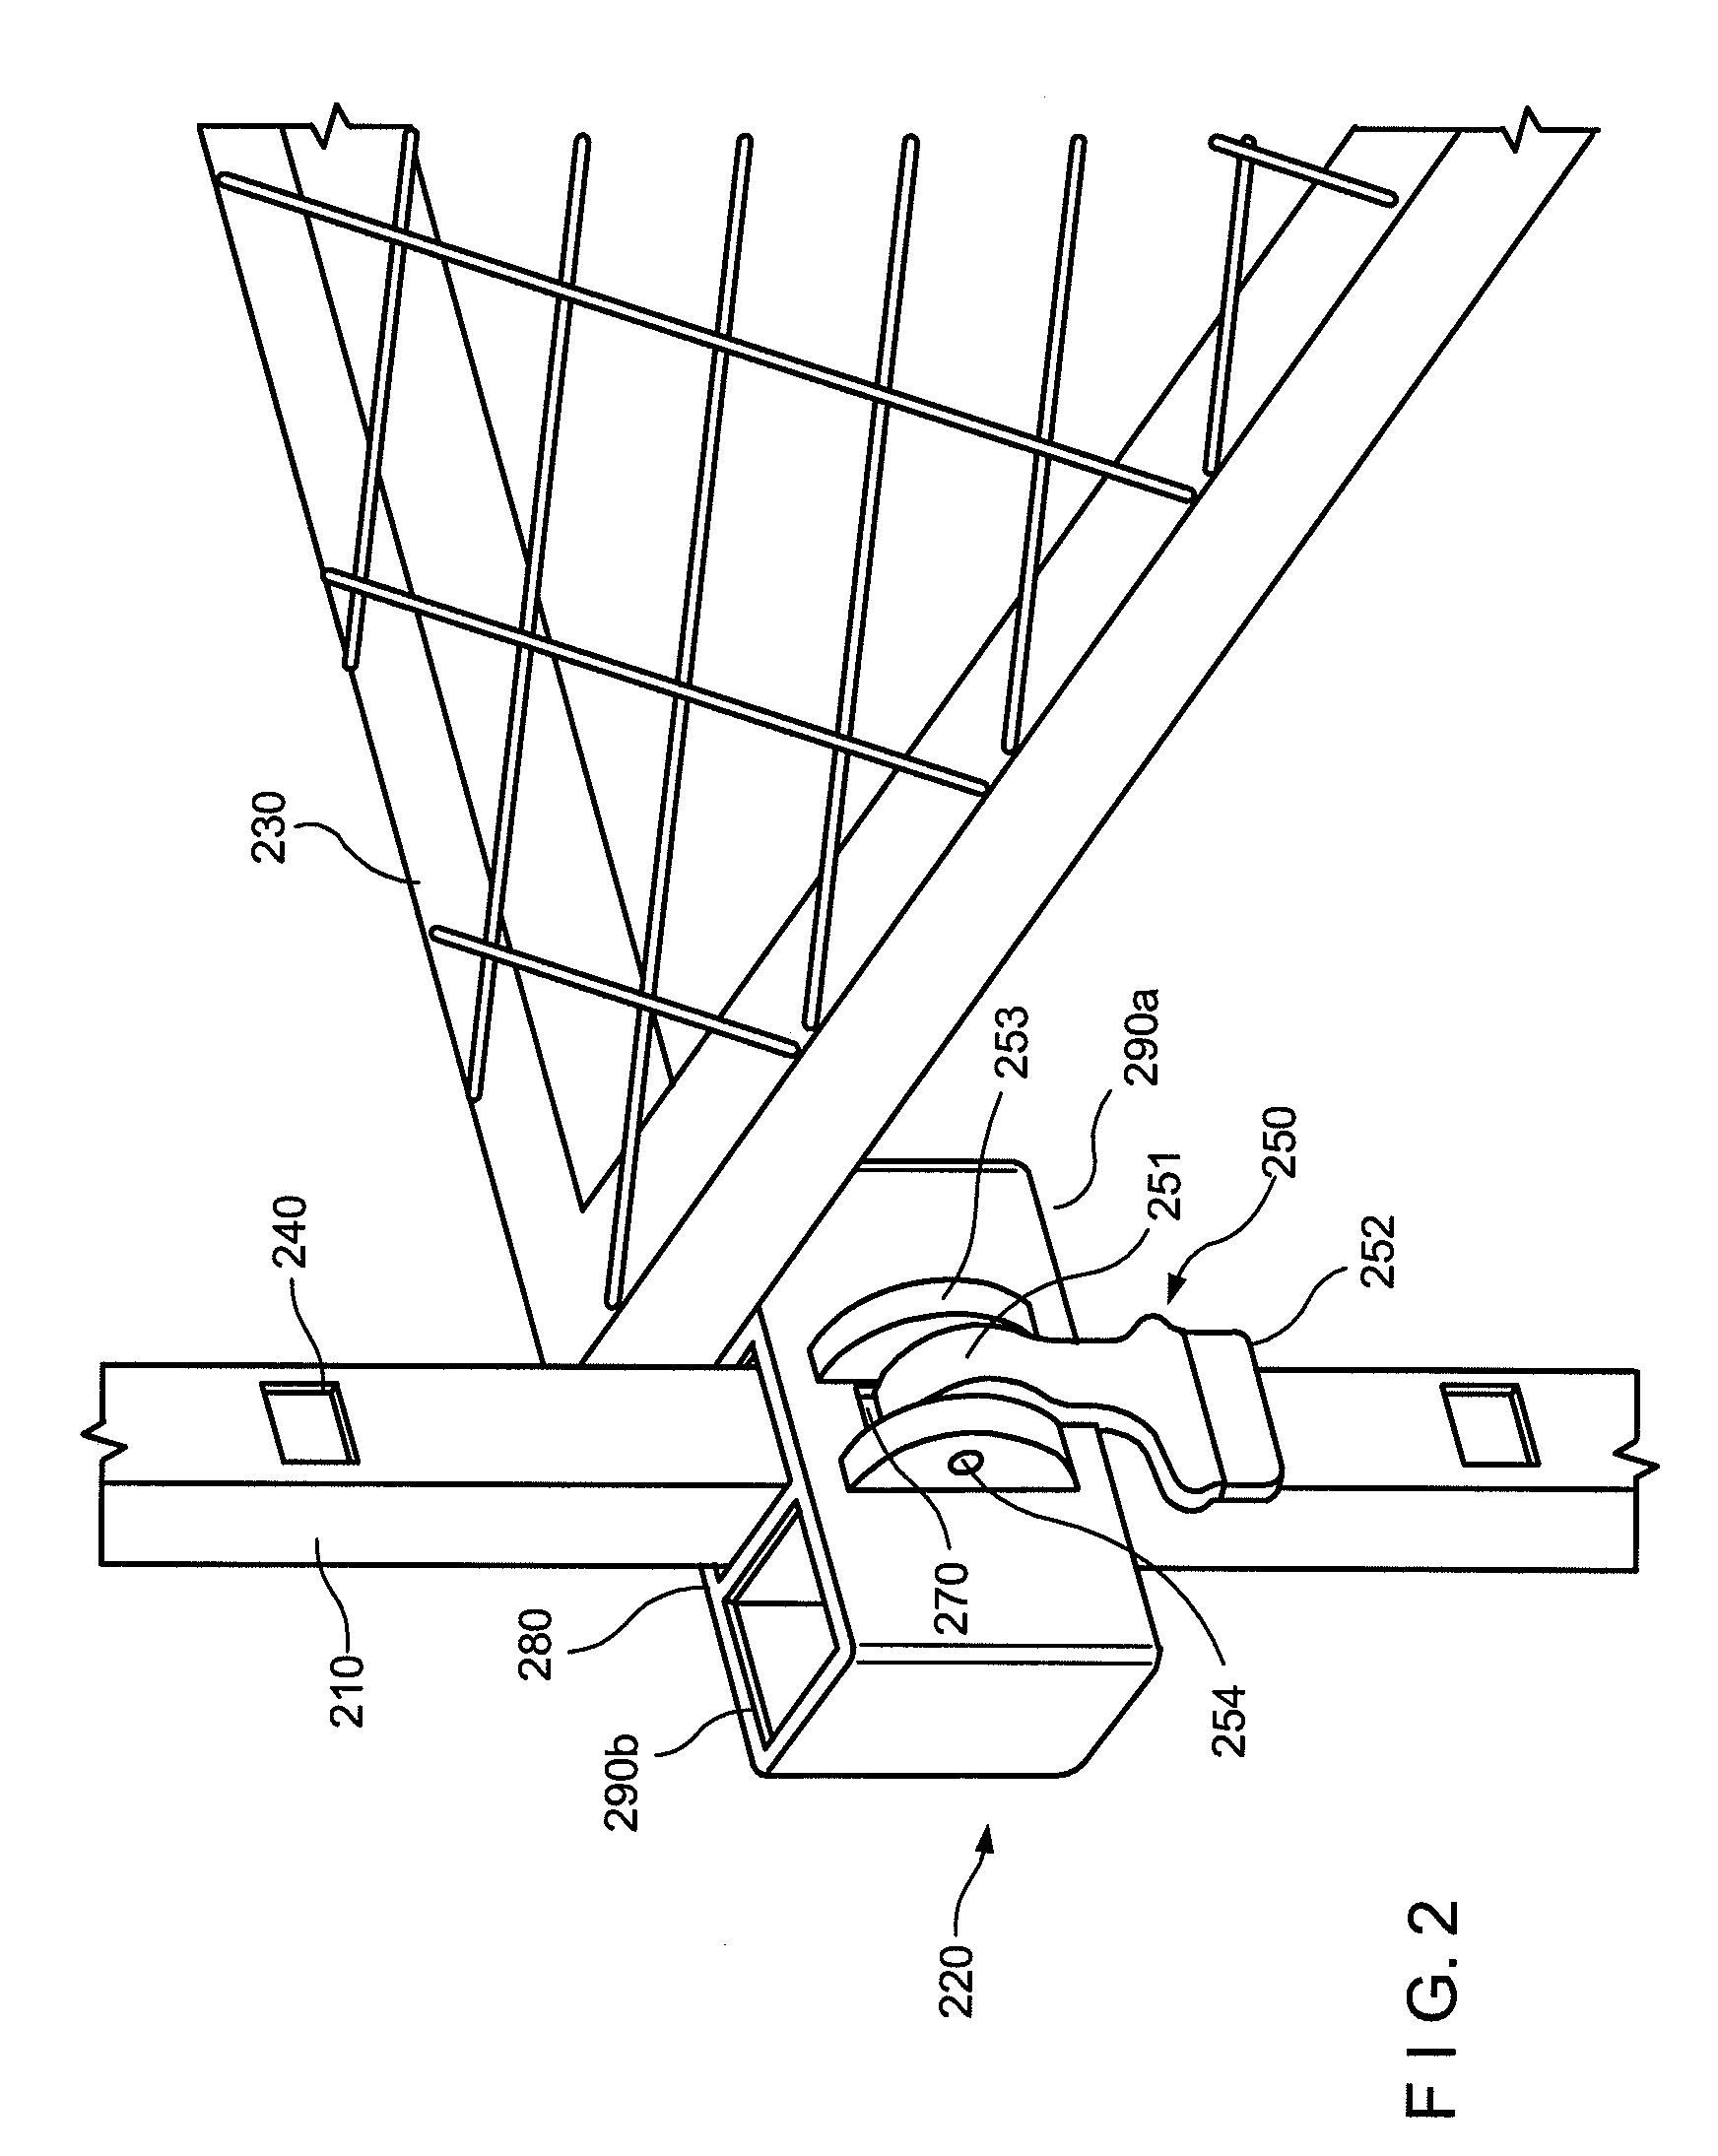 Shelving system with stabilizing brackets and method of assembly